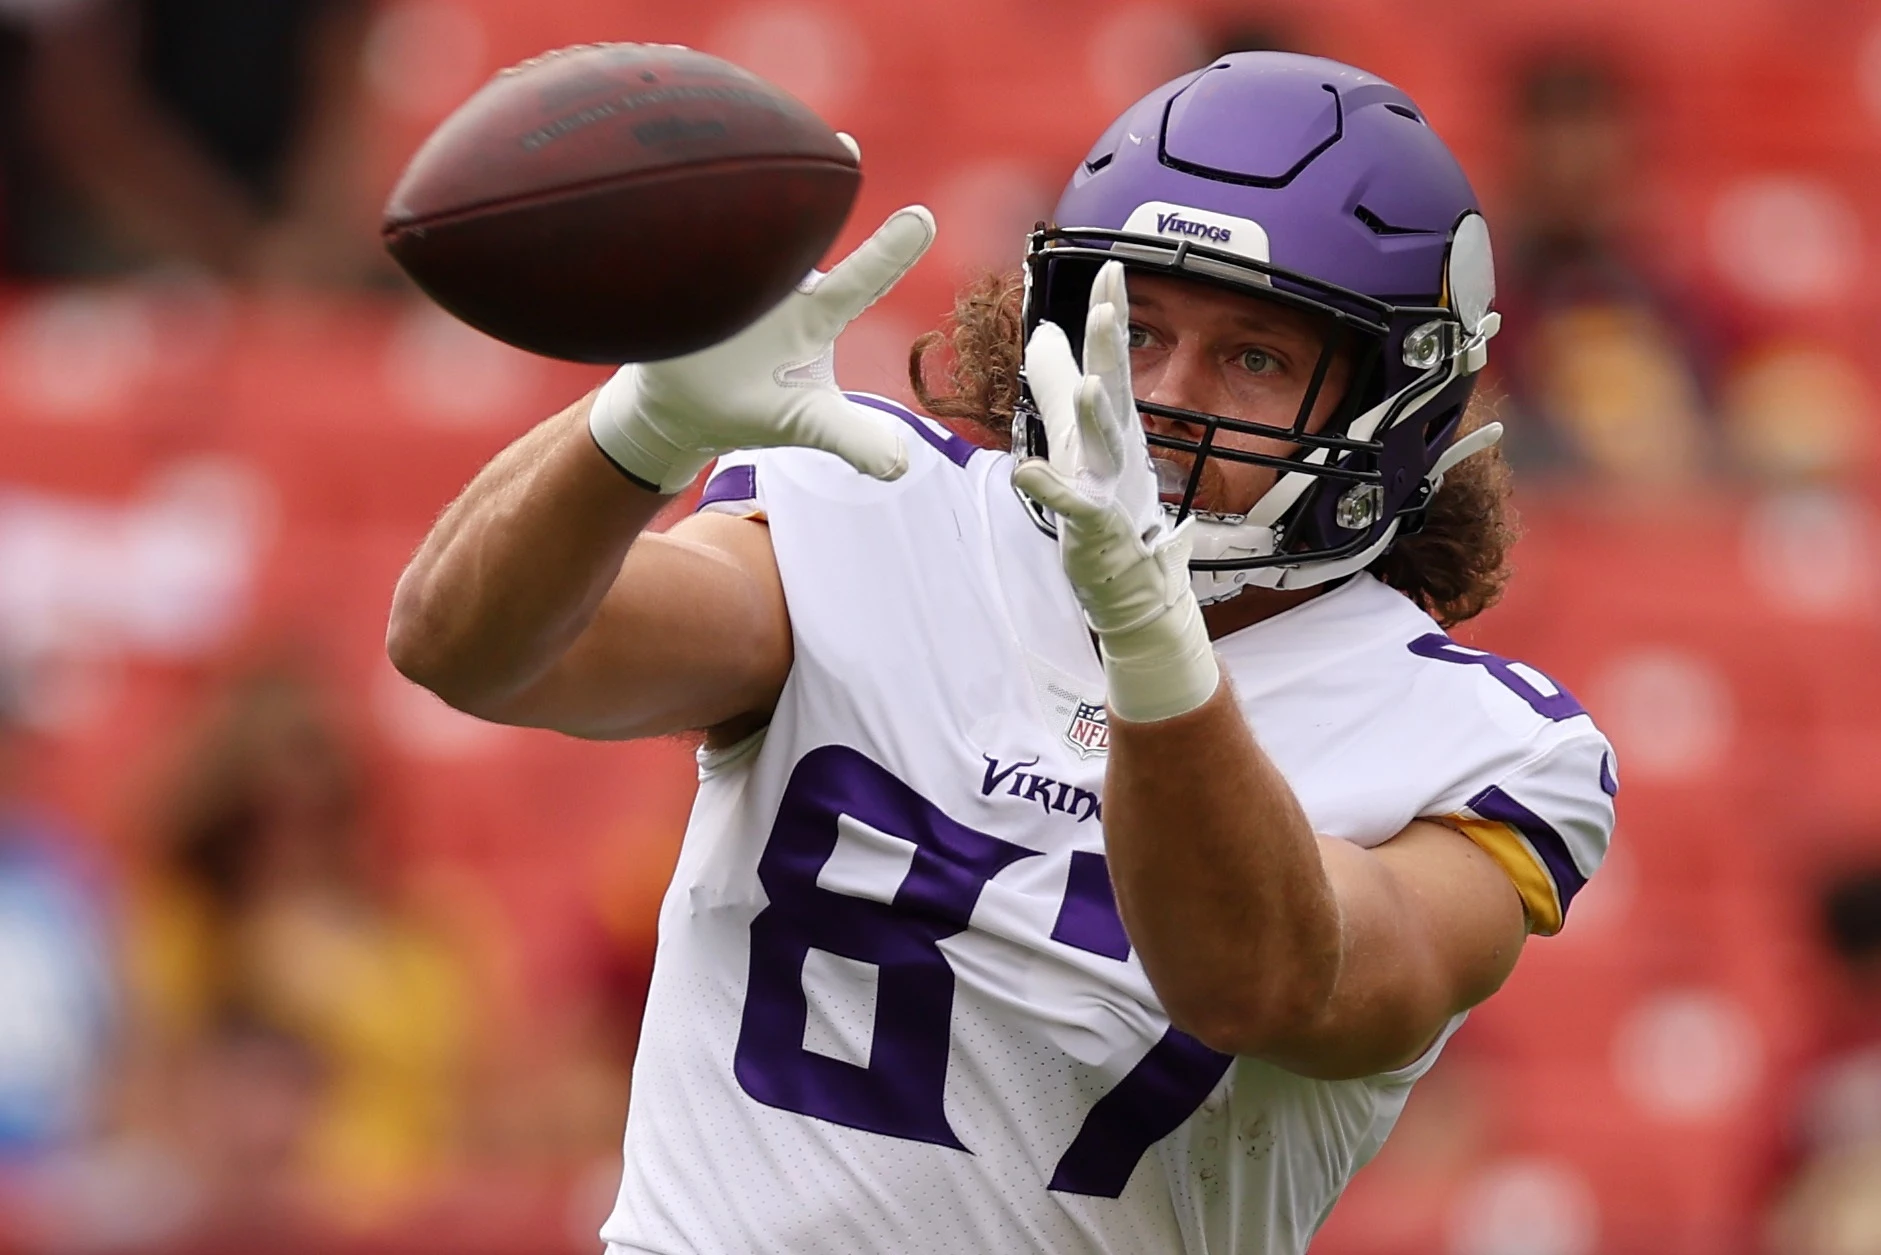 The Vikings have the red zone blues with an up-close touchdown